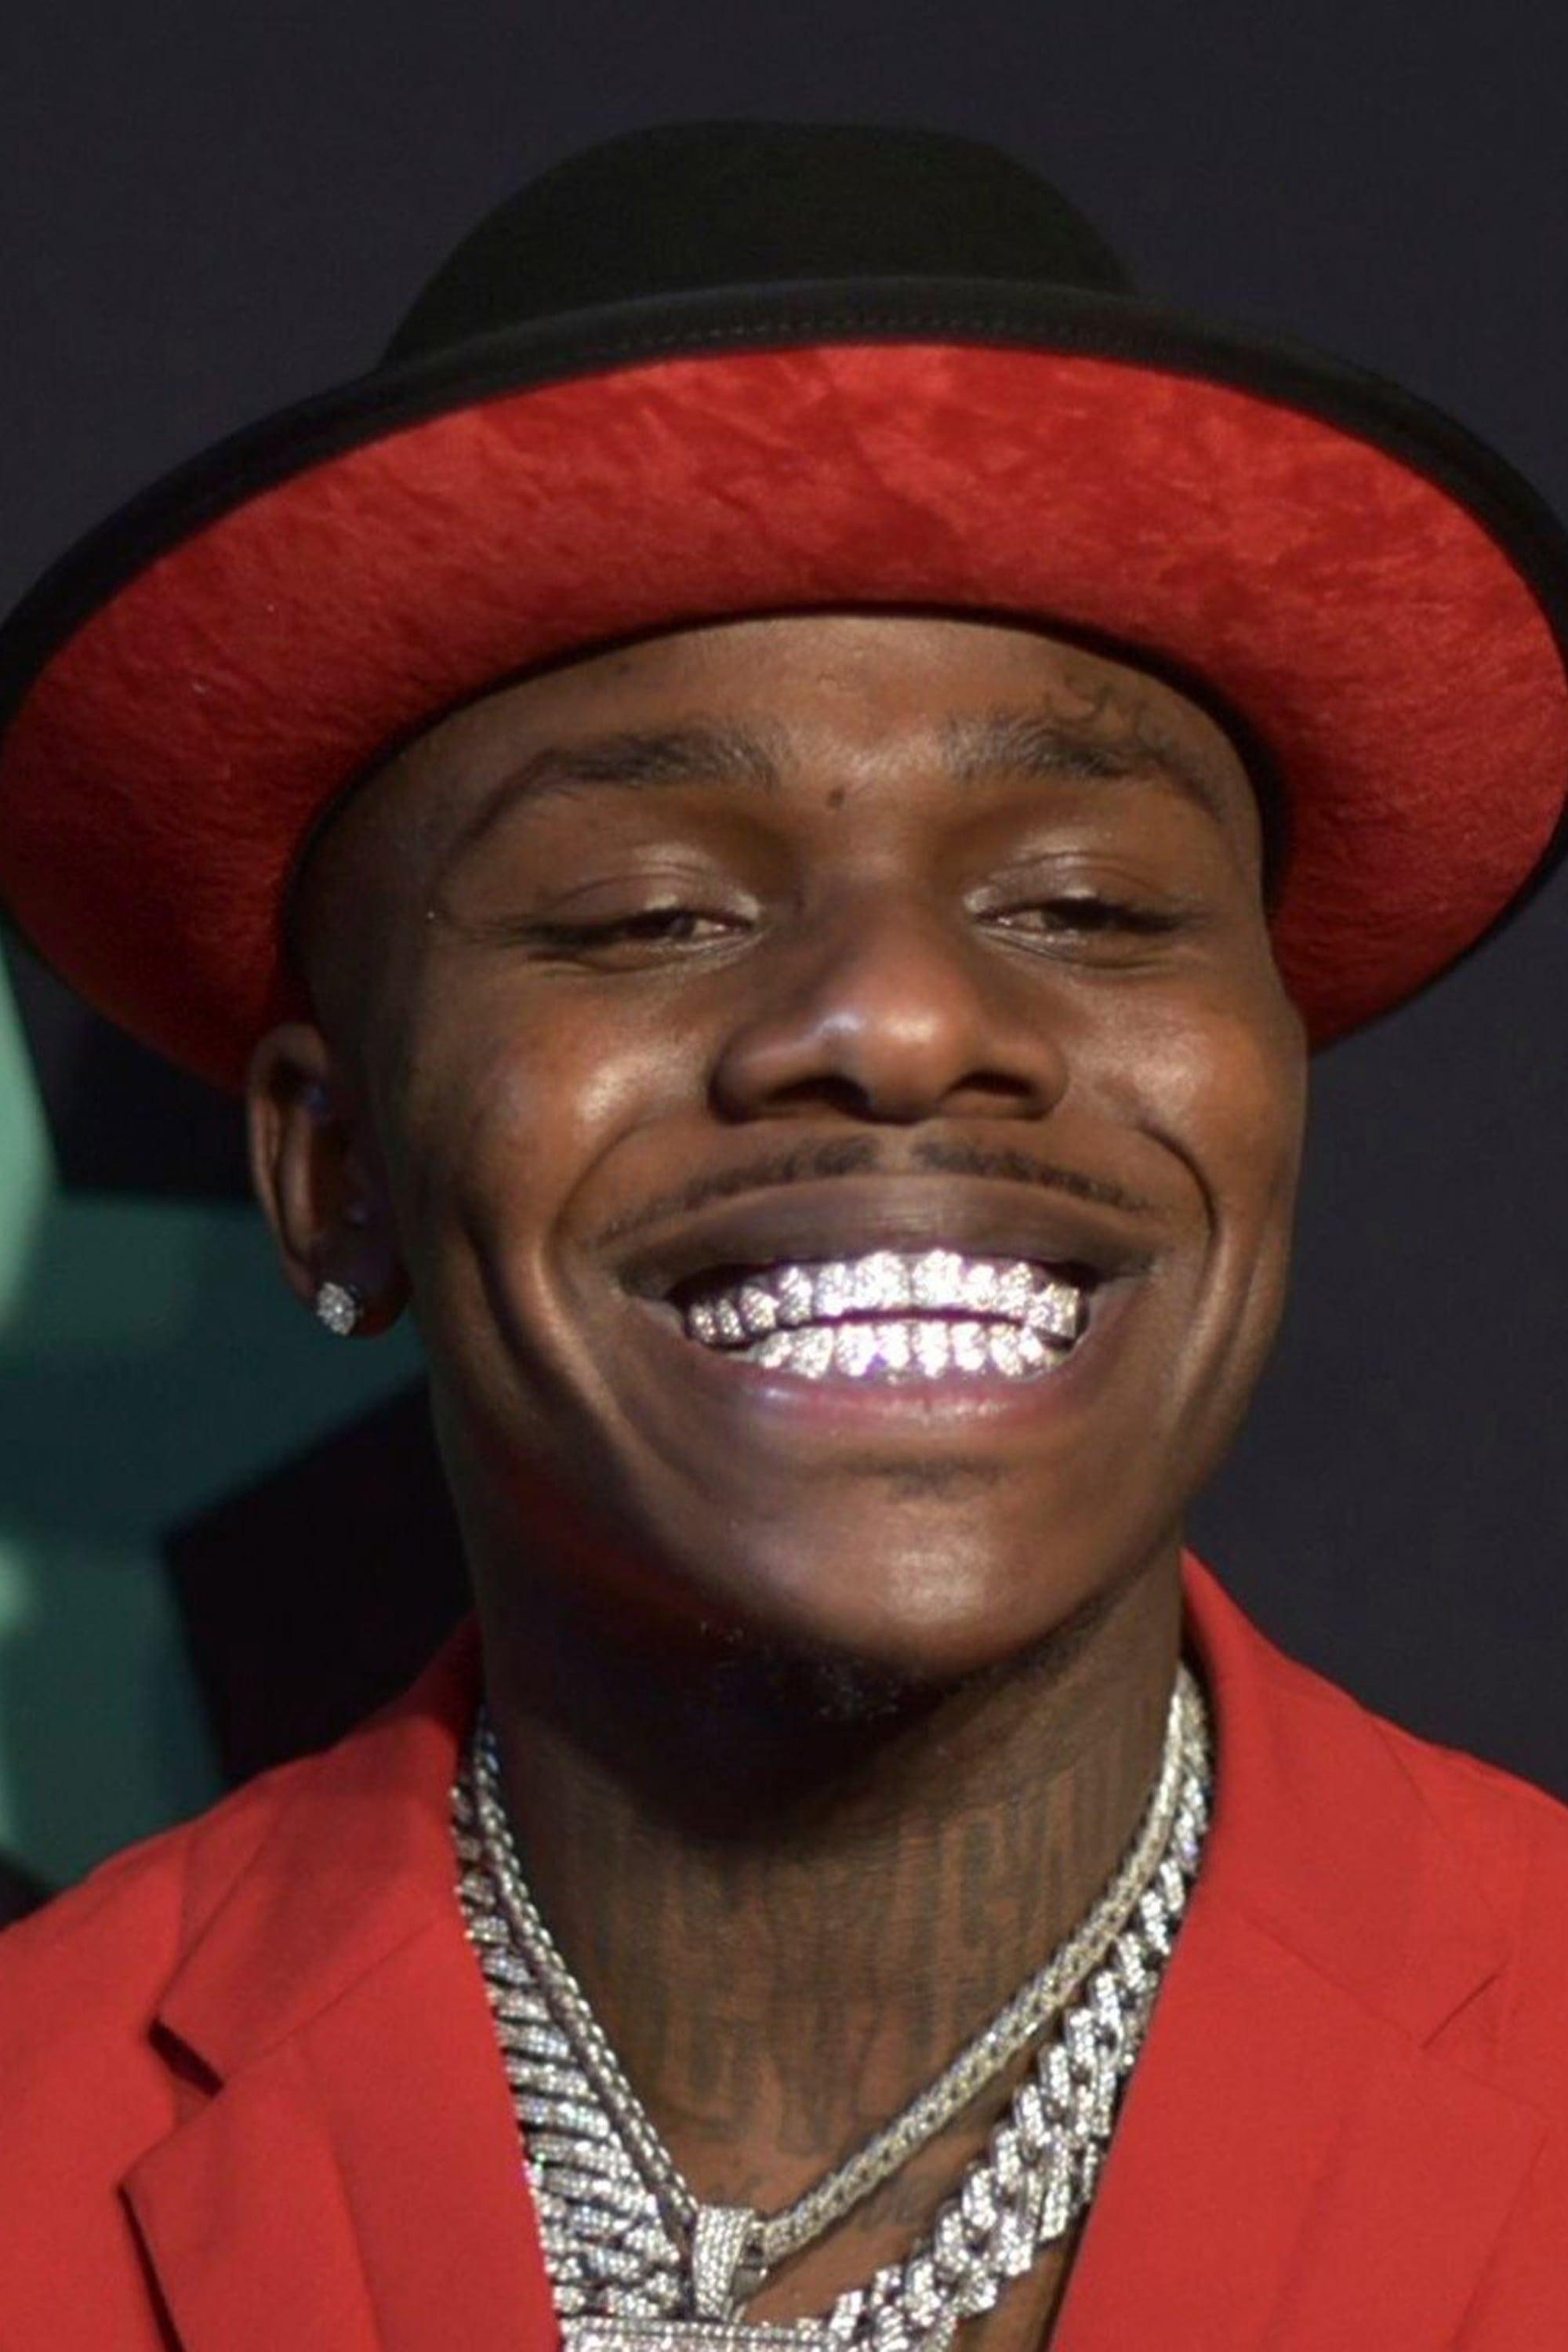 DaBaby poster